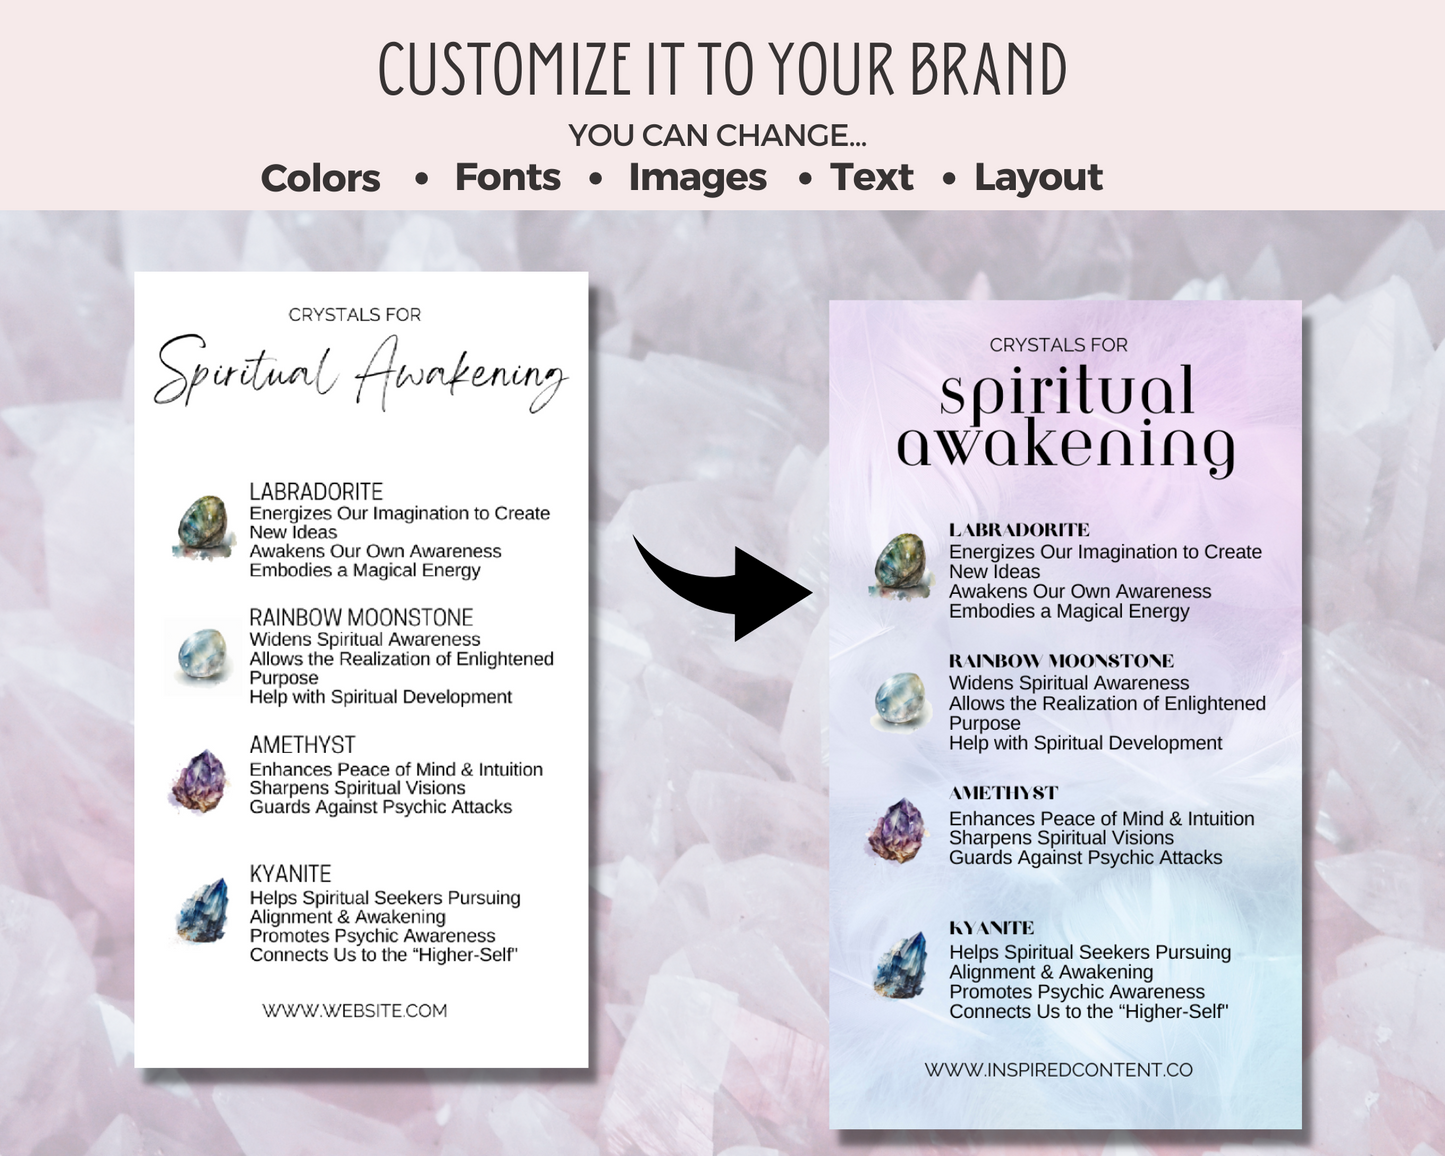 32 Crystals for Spirituality Cards, Editable Crystal Kit Cards Set Business Card Size